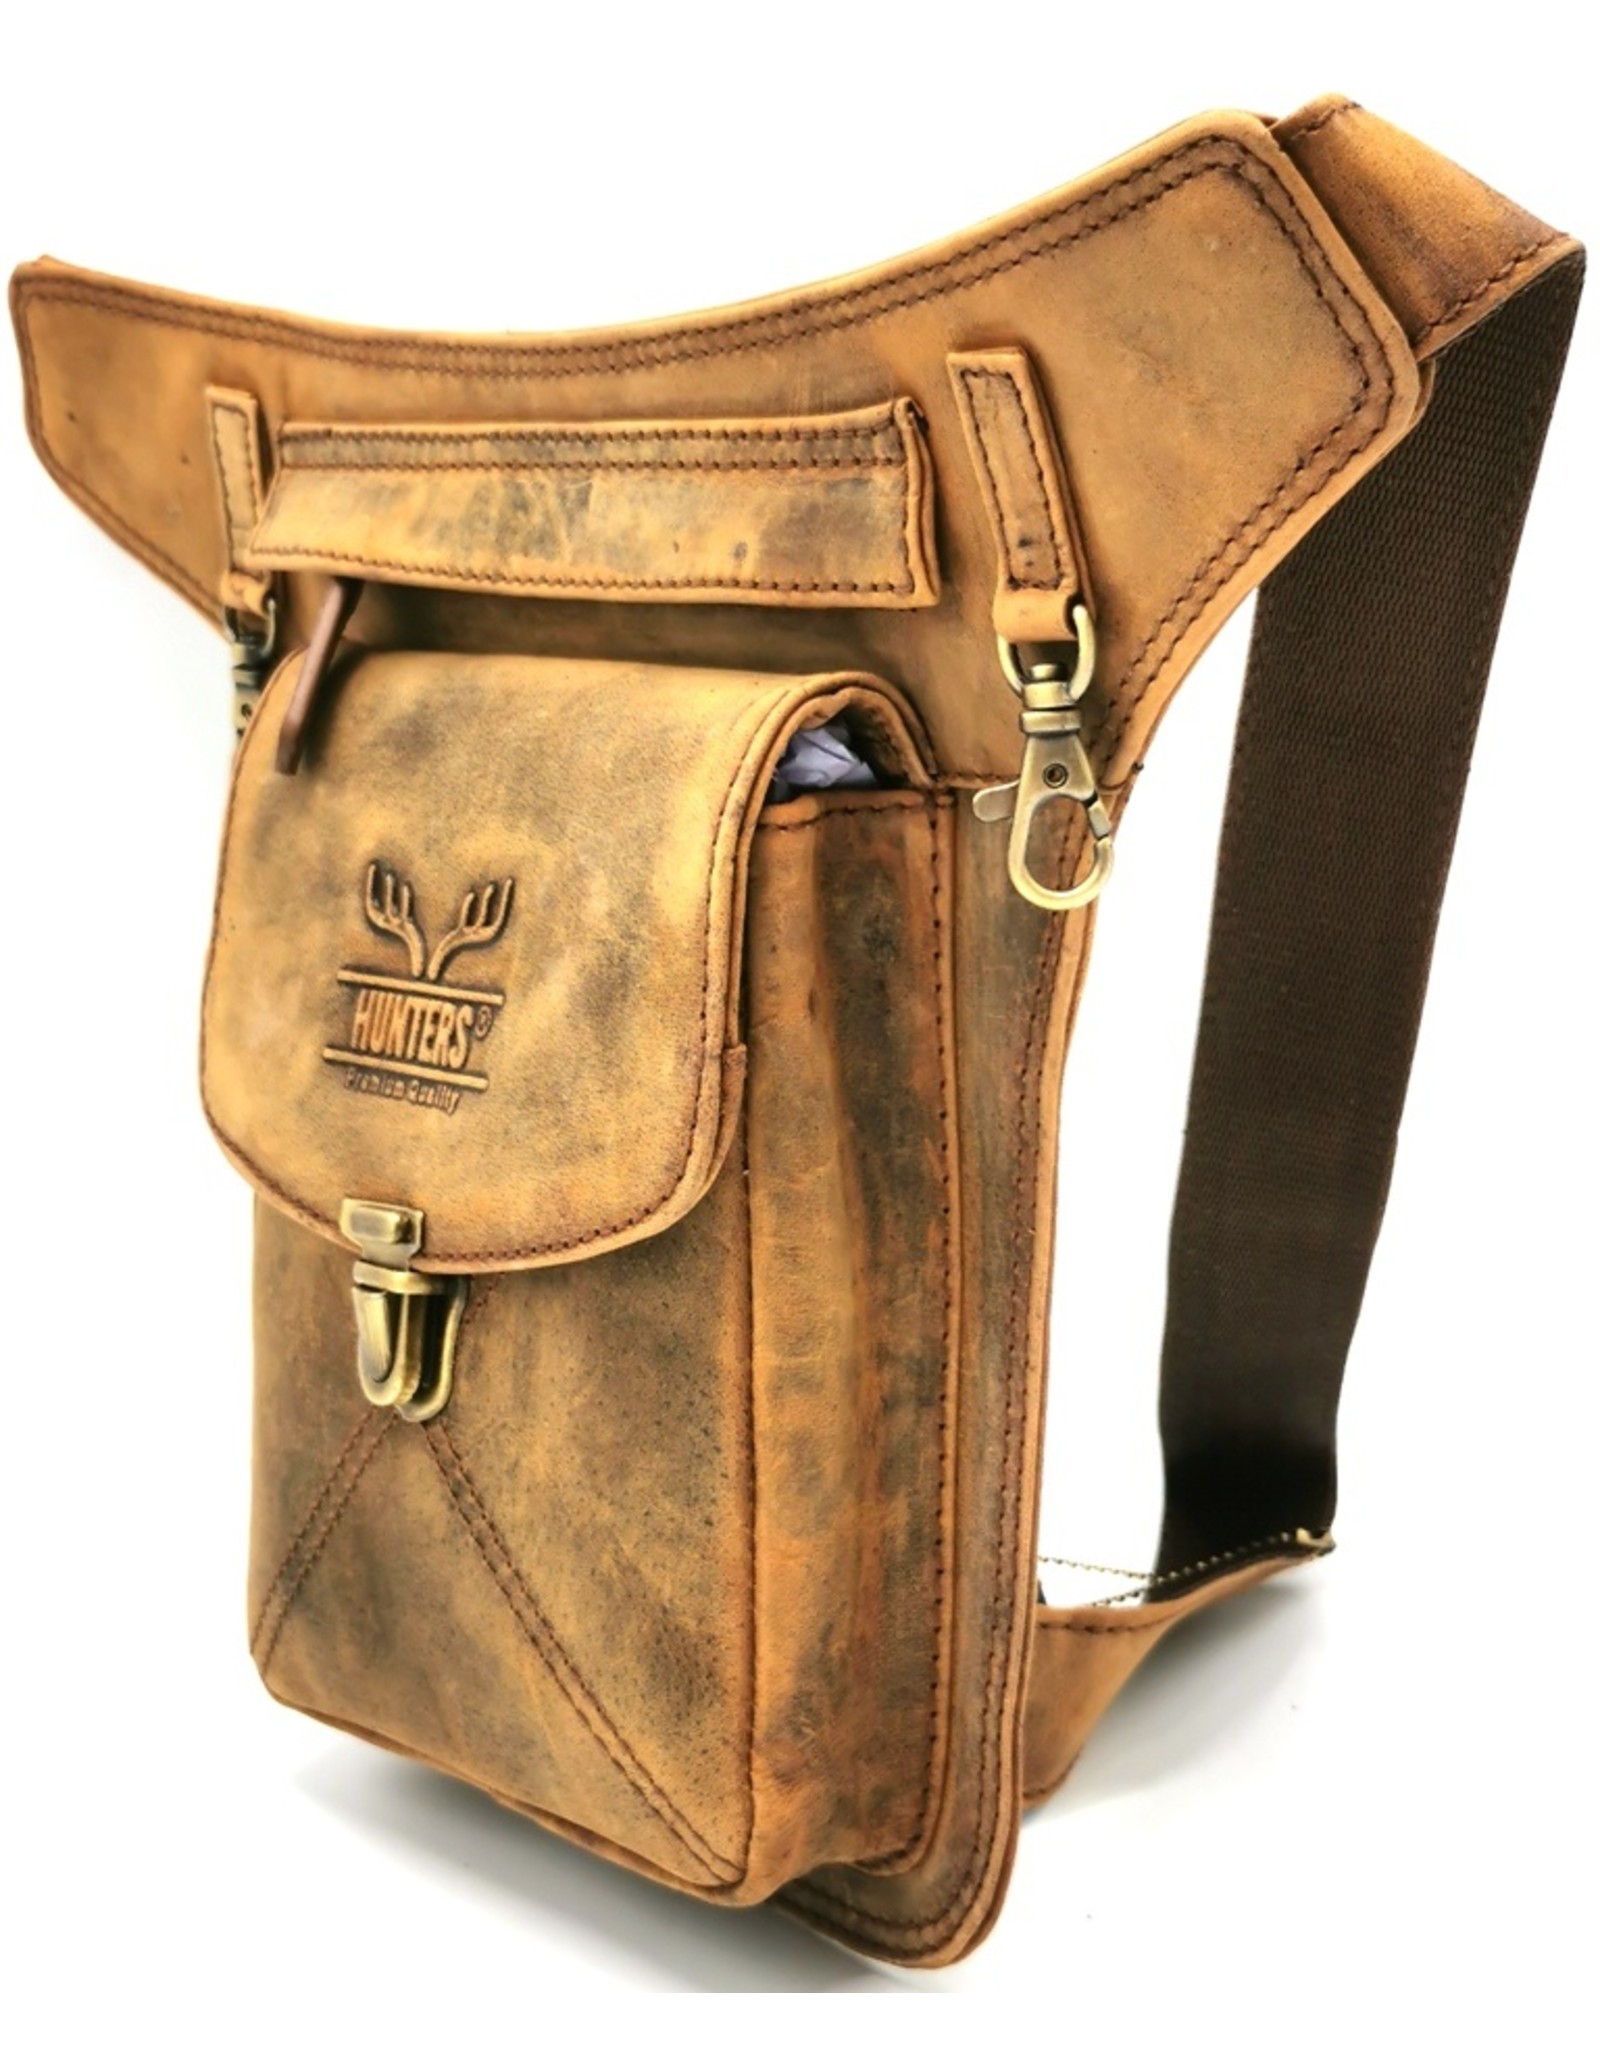 Hunters Leather Festival bags, waist bags and belt bags - Hunters waist bag vintage look tanned leather